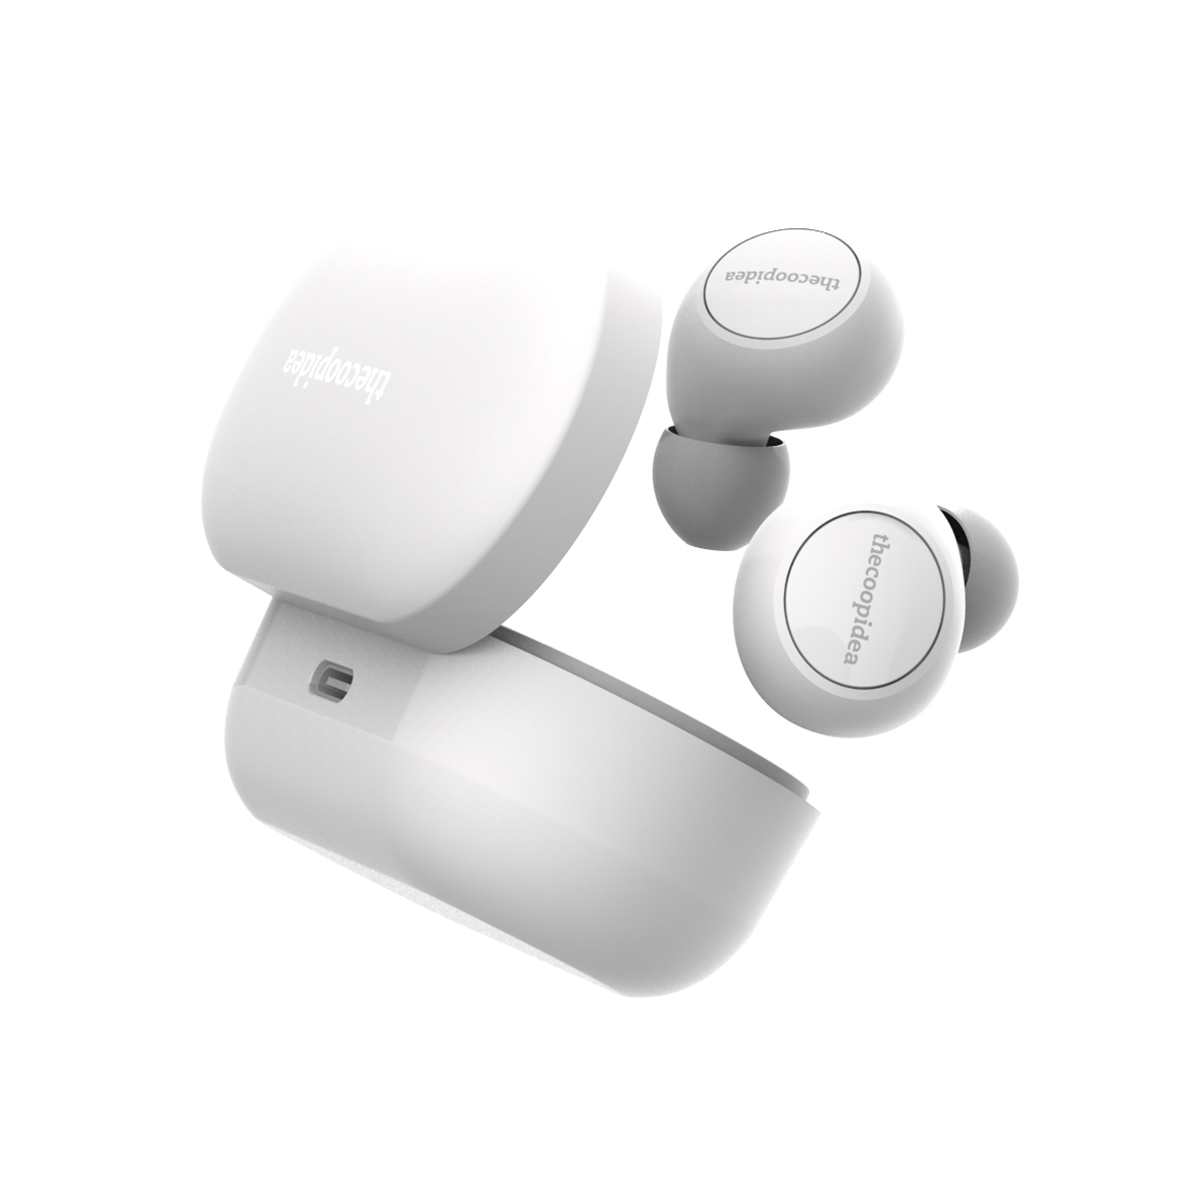 thecoopidea - CANDY True Wireless Earbuds - LightGrey